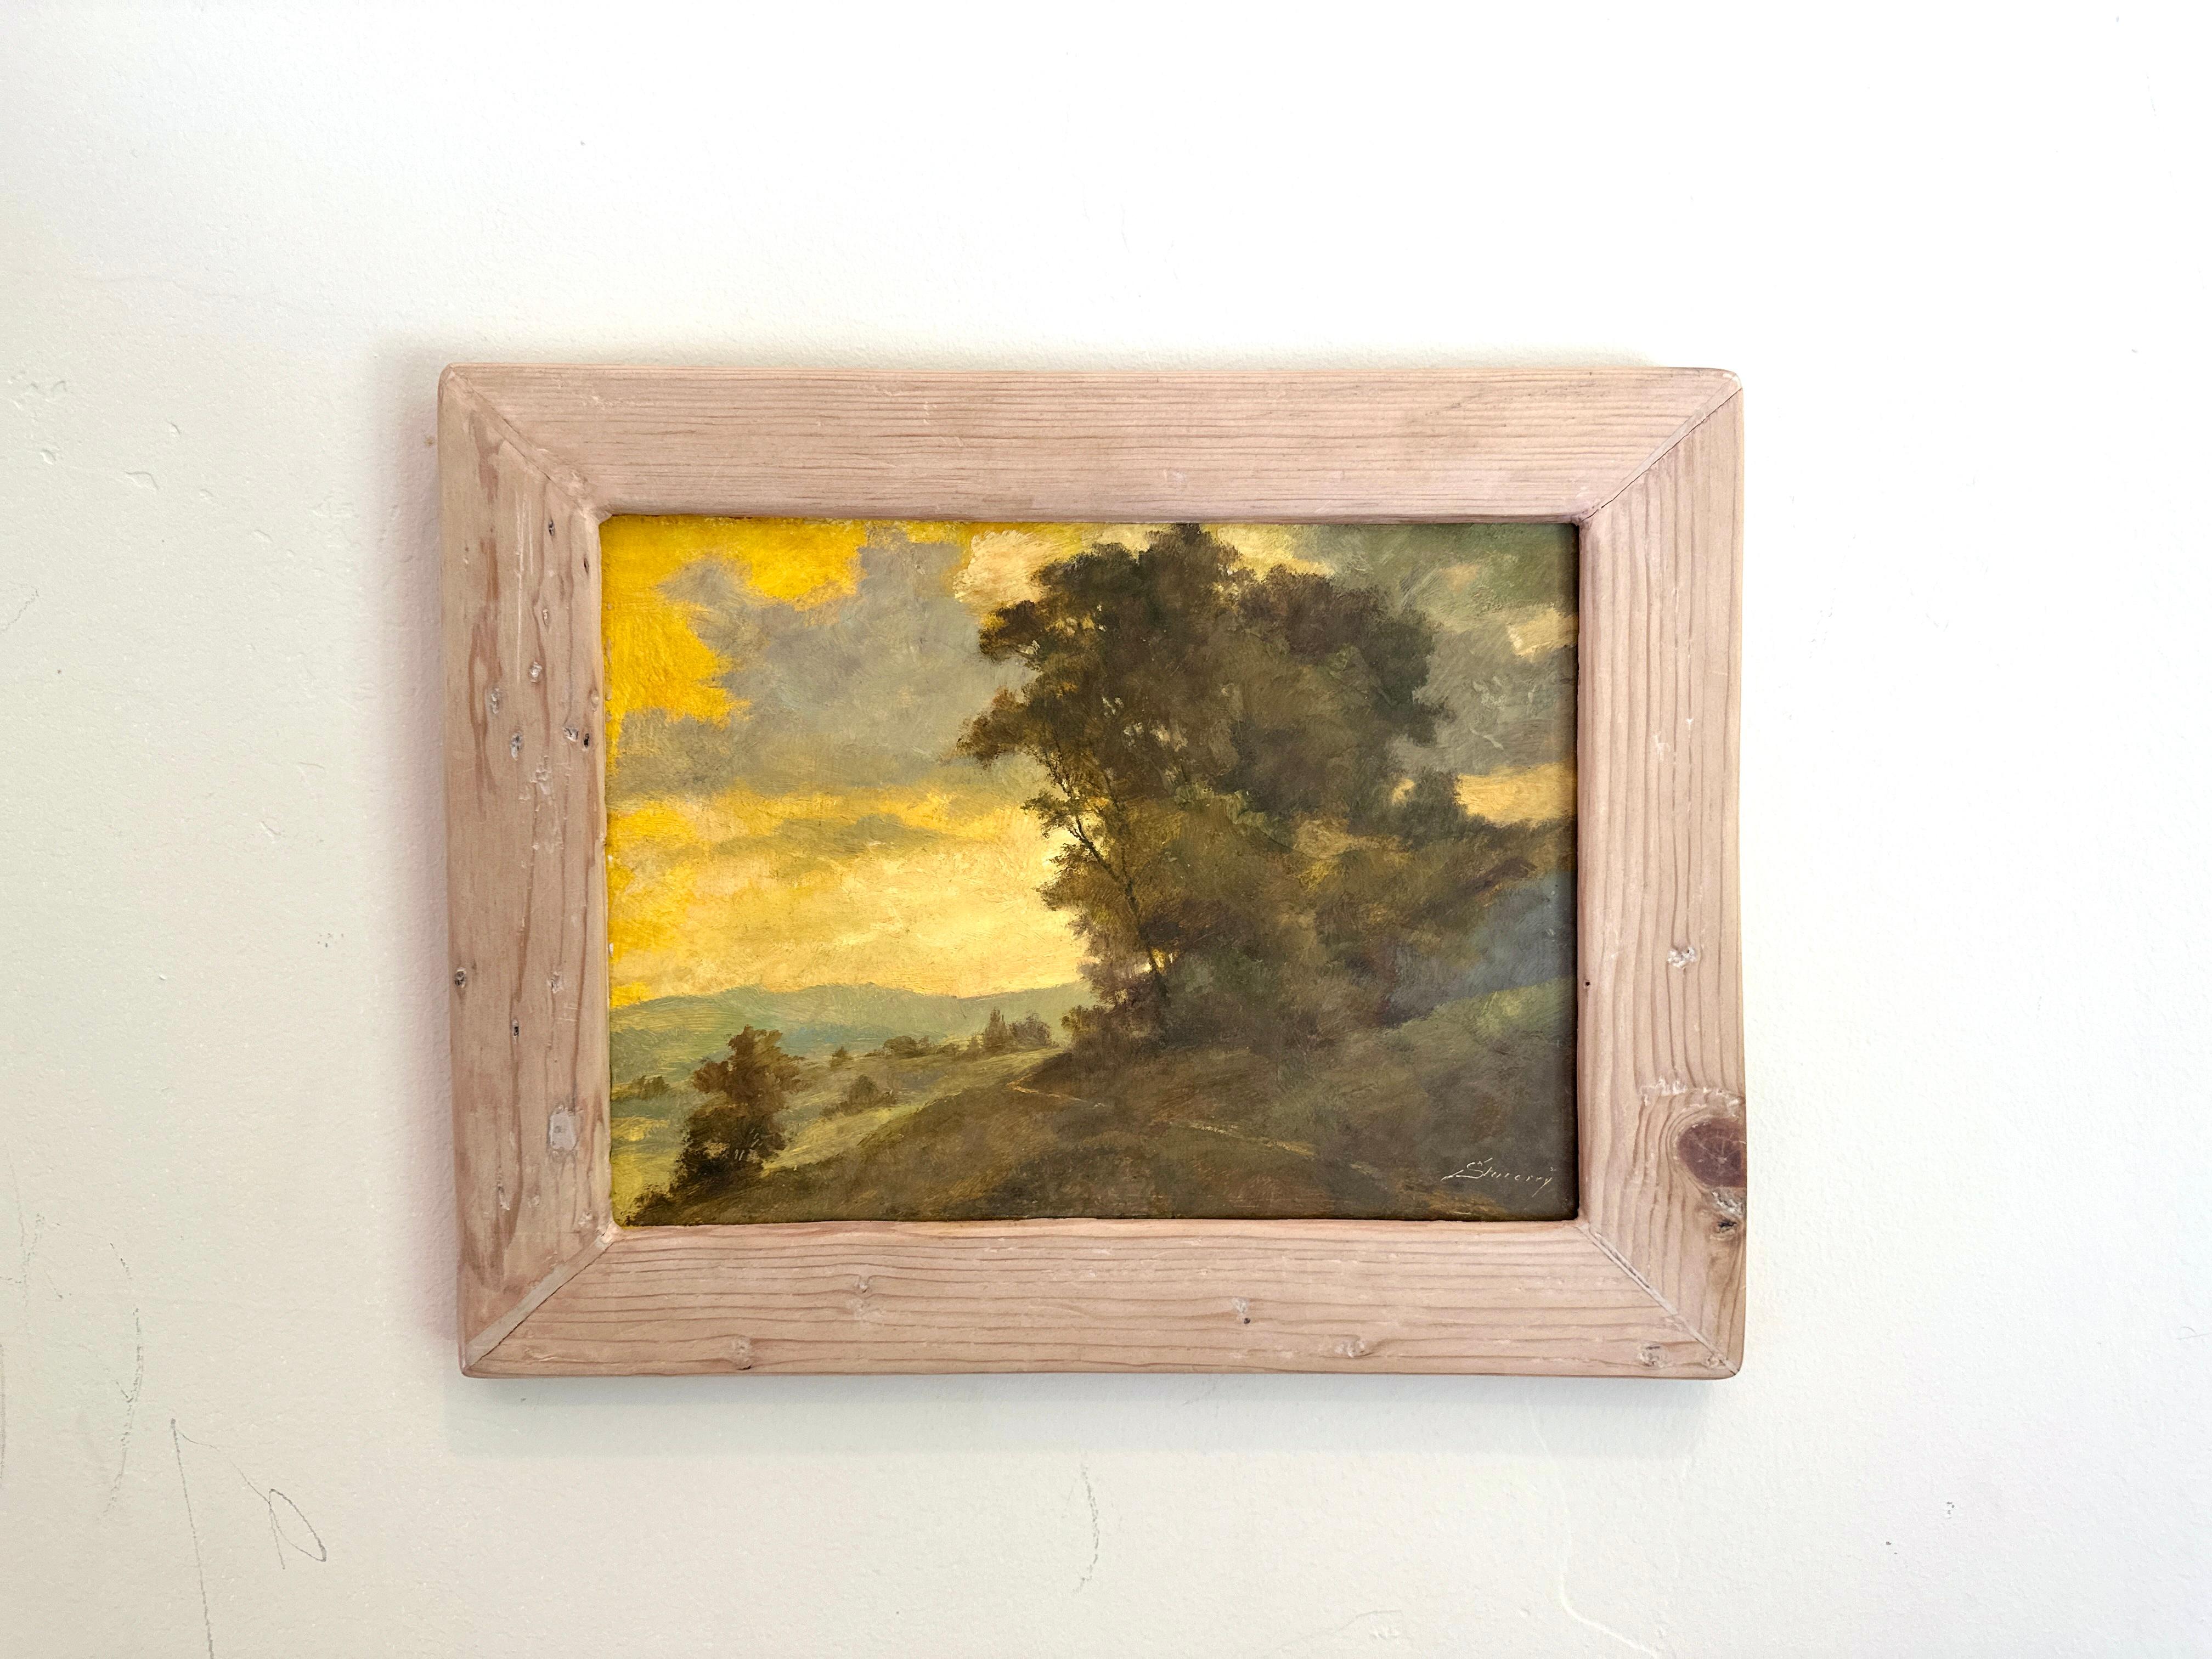 Plein air oil sketch of a landscape in the Bordeaux region of France, by Albert Stucory, c. 1900. Beautifully framed in  a bespoke, handcrafted rustic frame. Modern farmhouse style and charm

Oil on board, signed, ‘Stucorry’, inscribed on